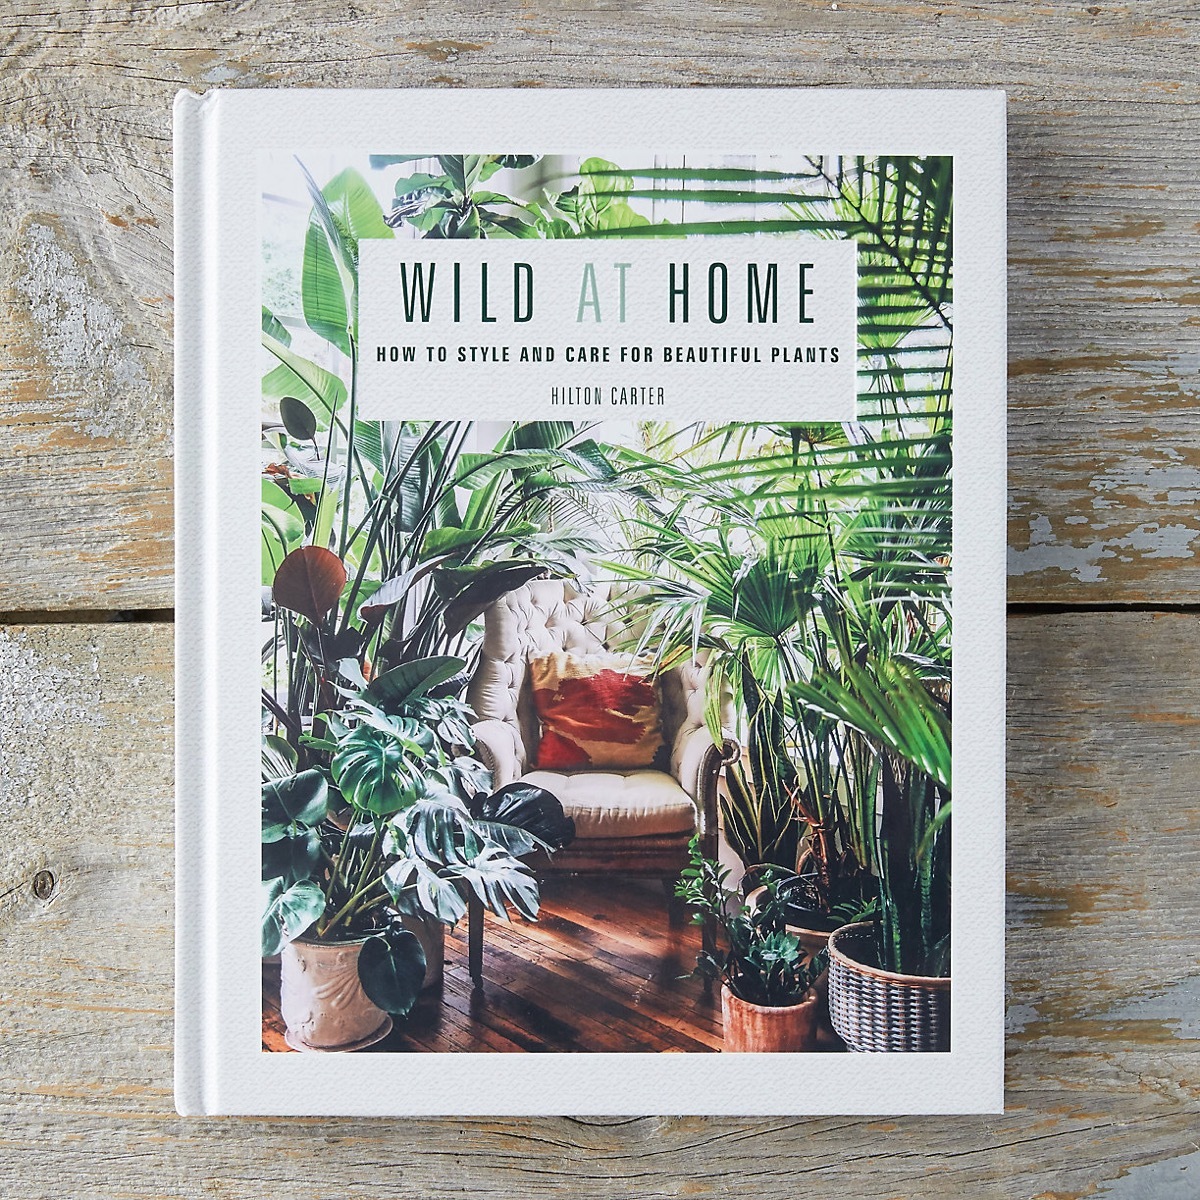 Wild at Home book on wood background